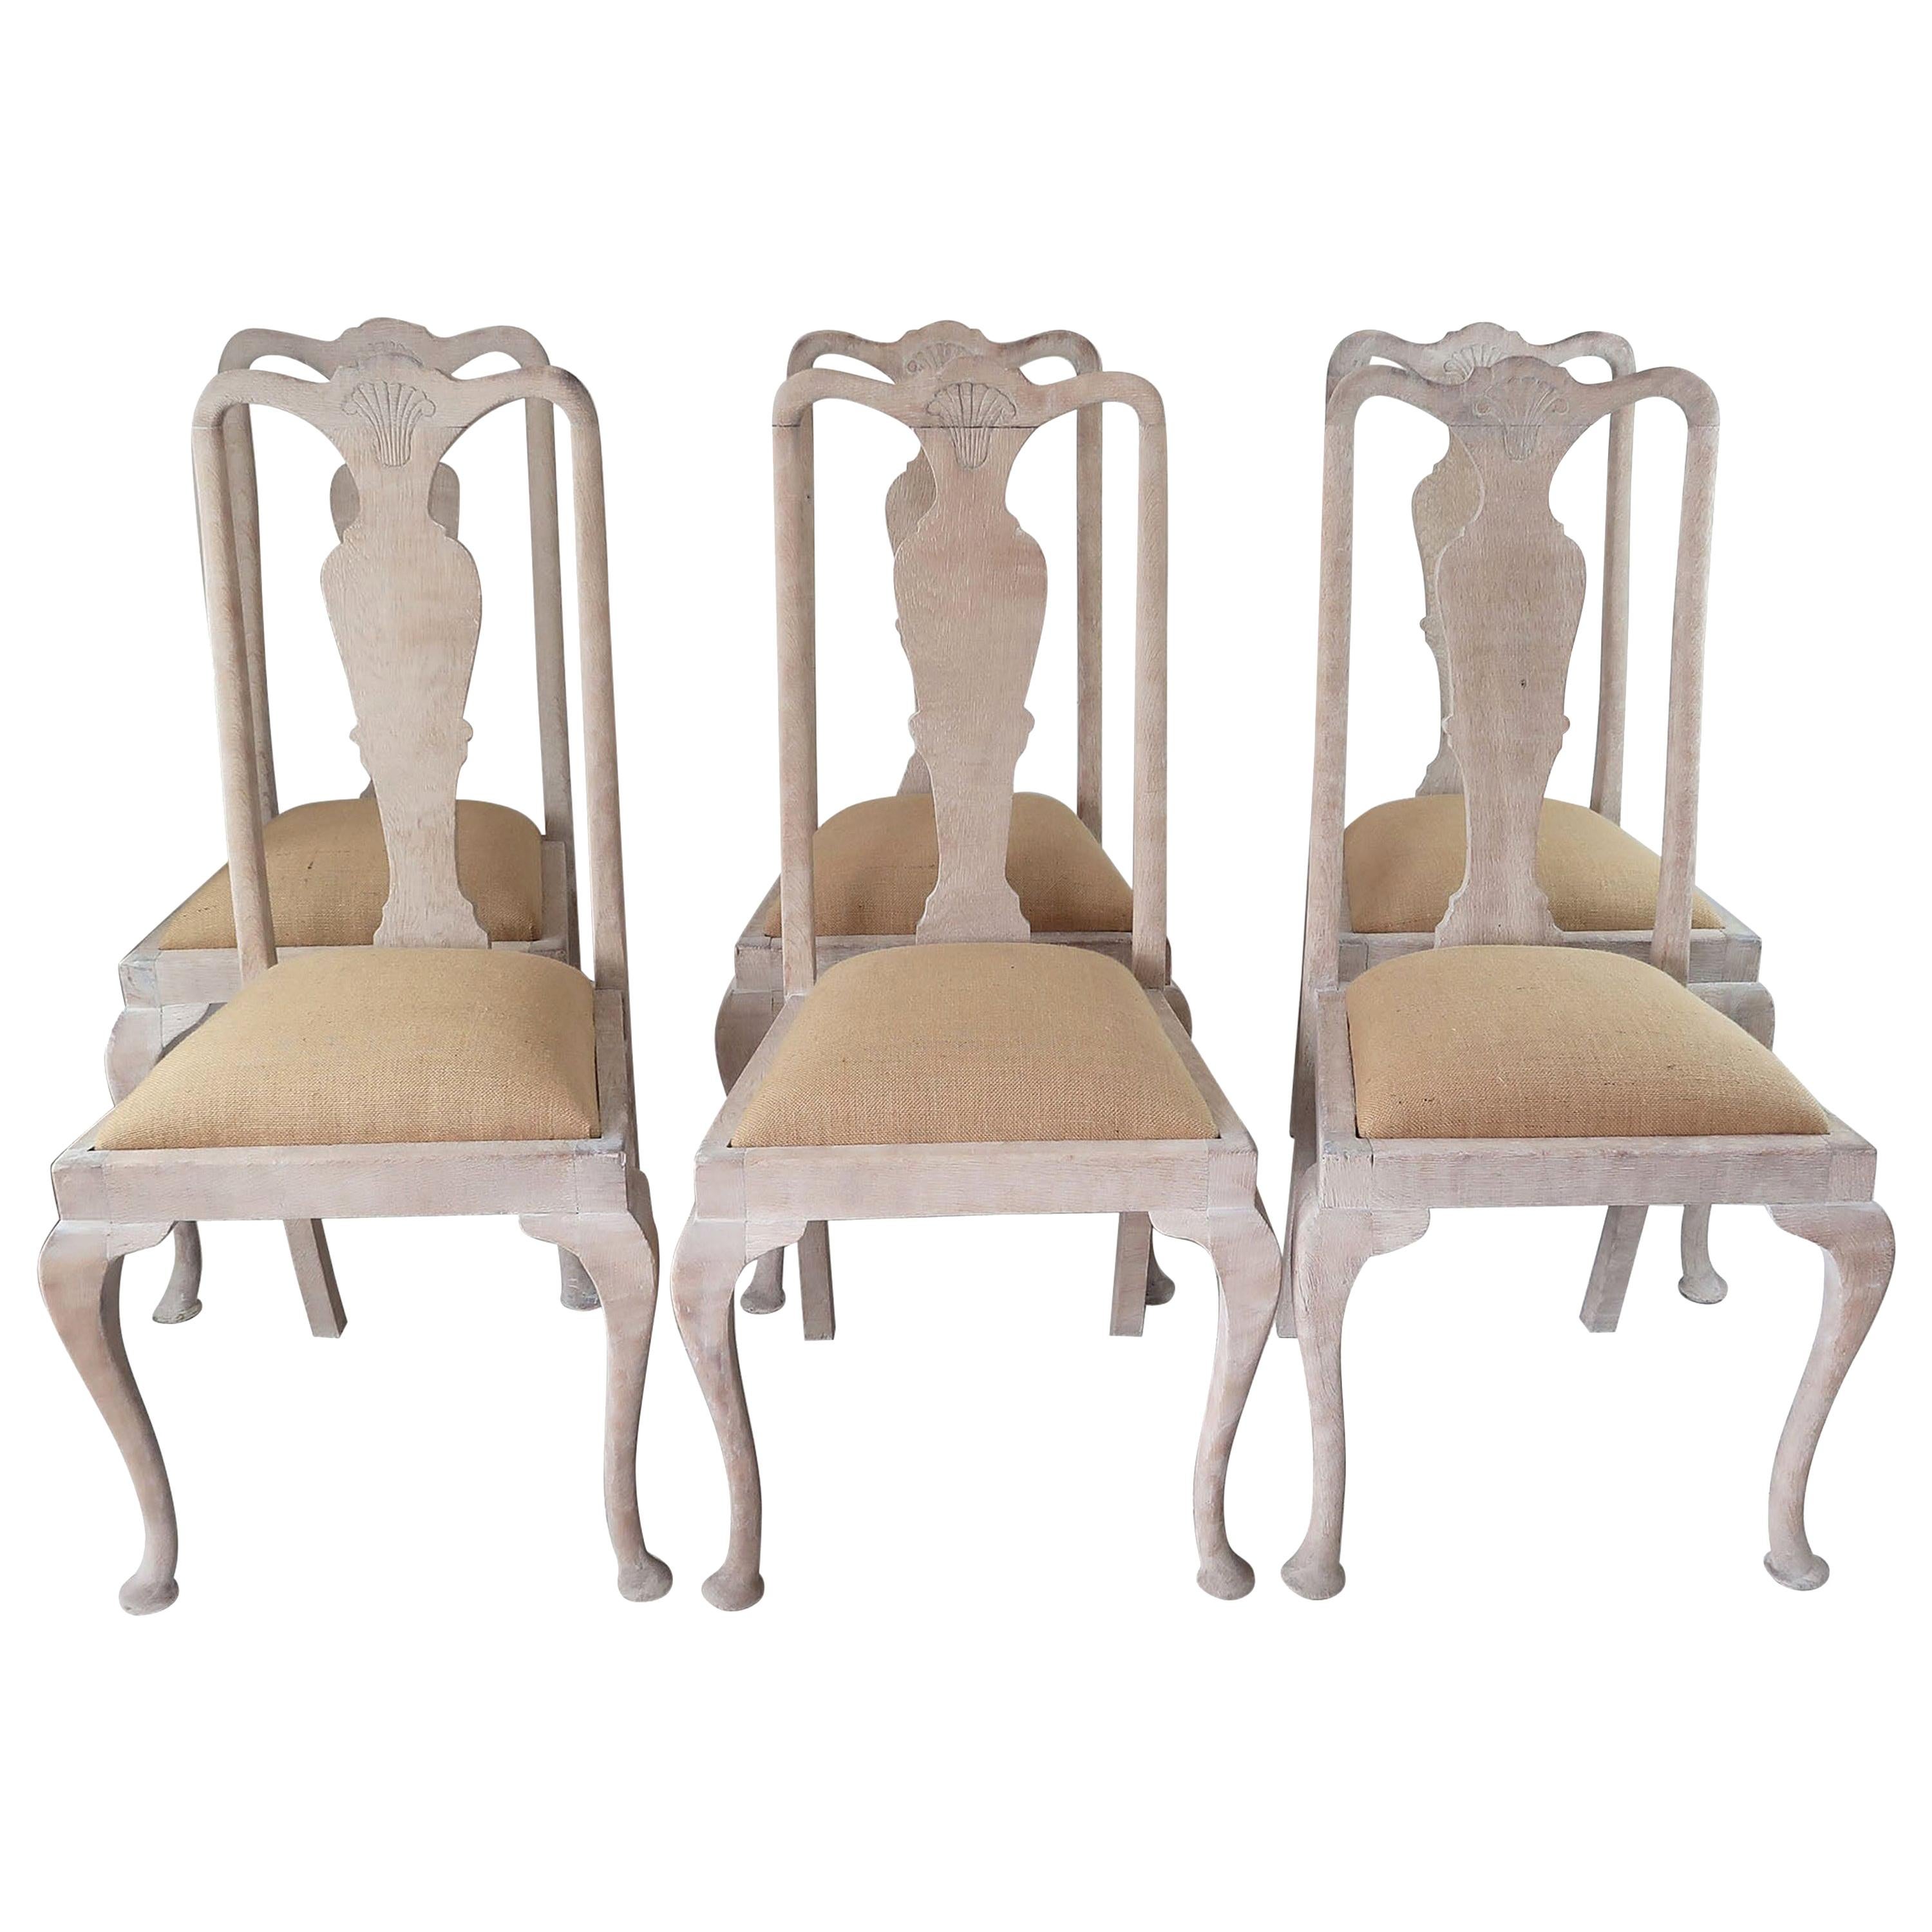  8 Antique Gustavian Style Urn Back Dining Chairs 